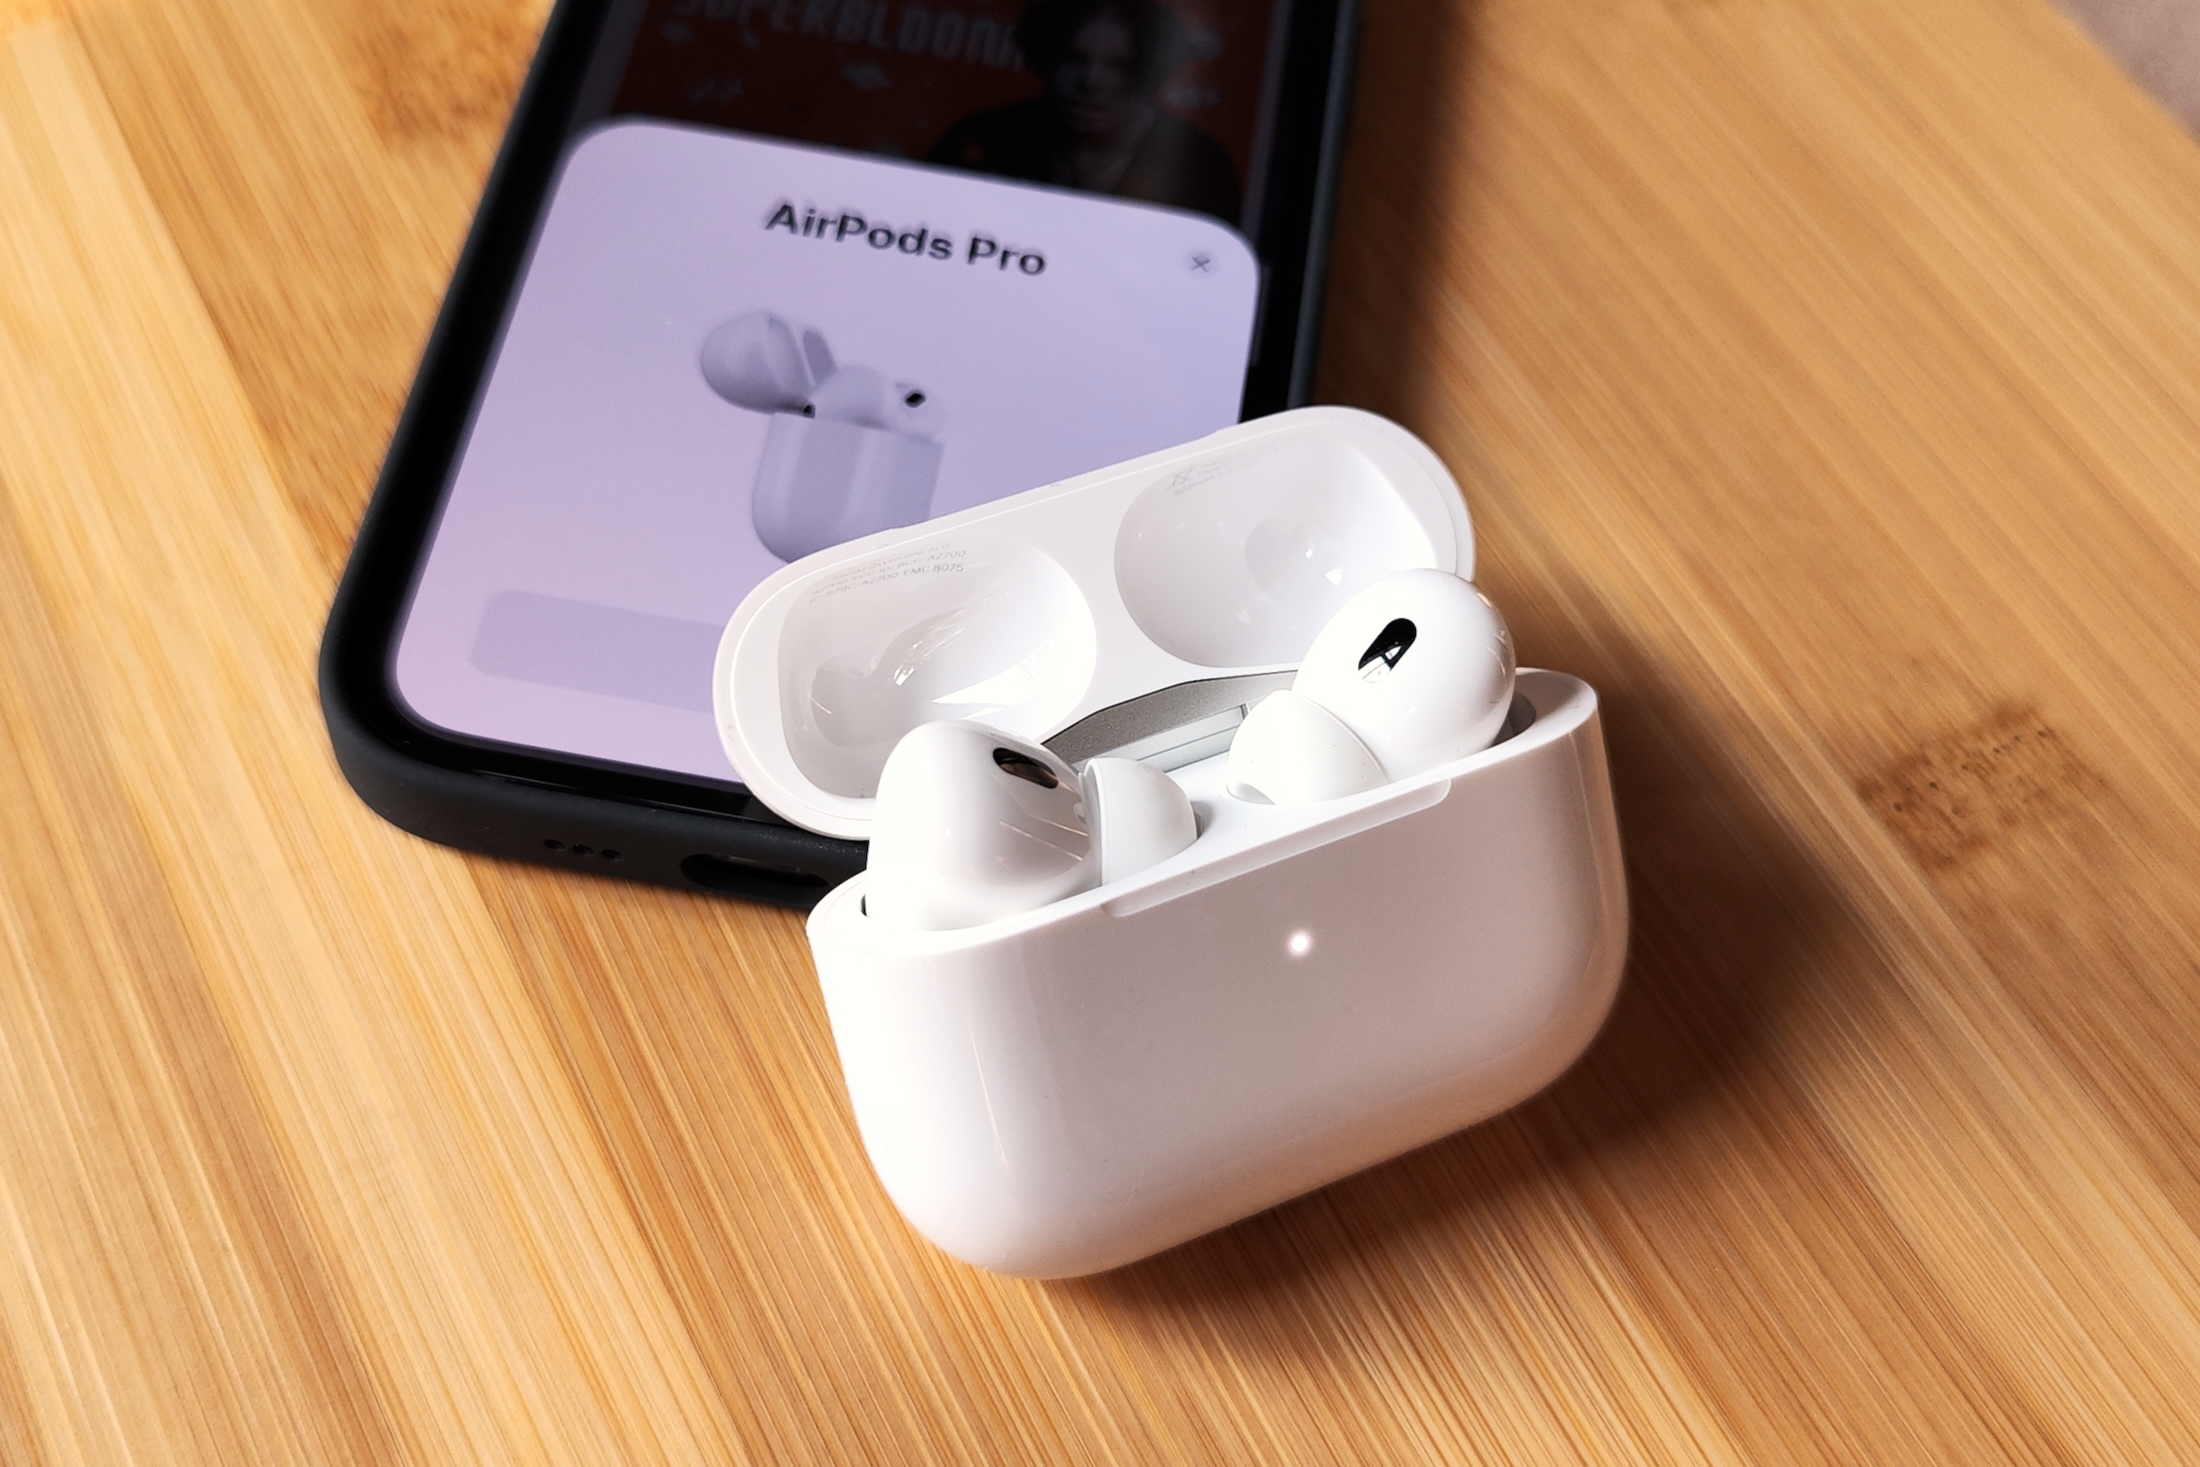 Apple's AirPods Pro earbuds are back at their cheapest-ever price